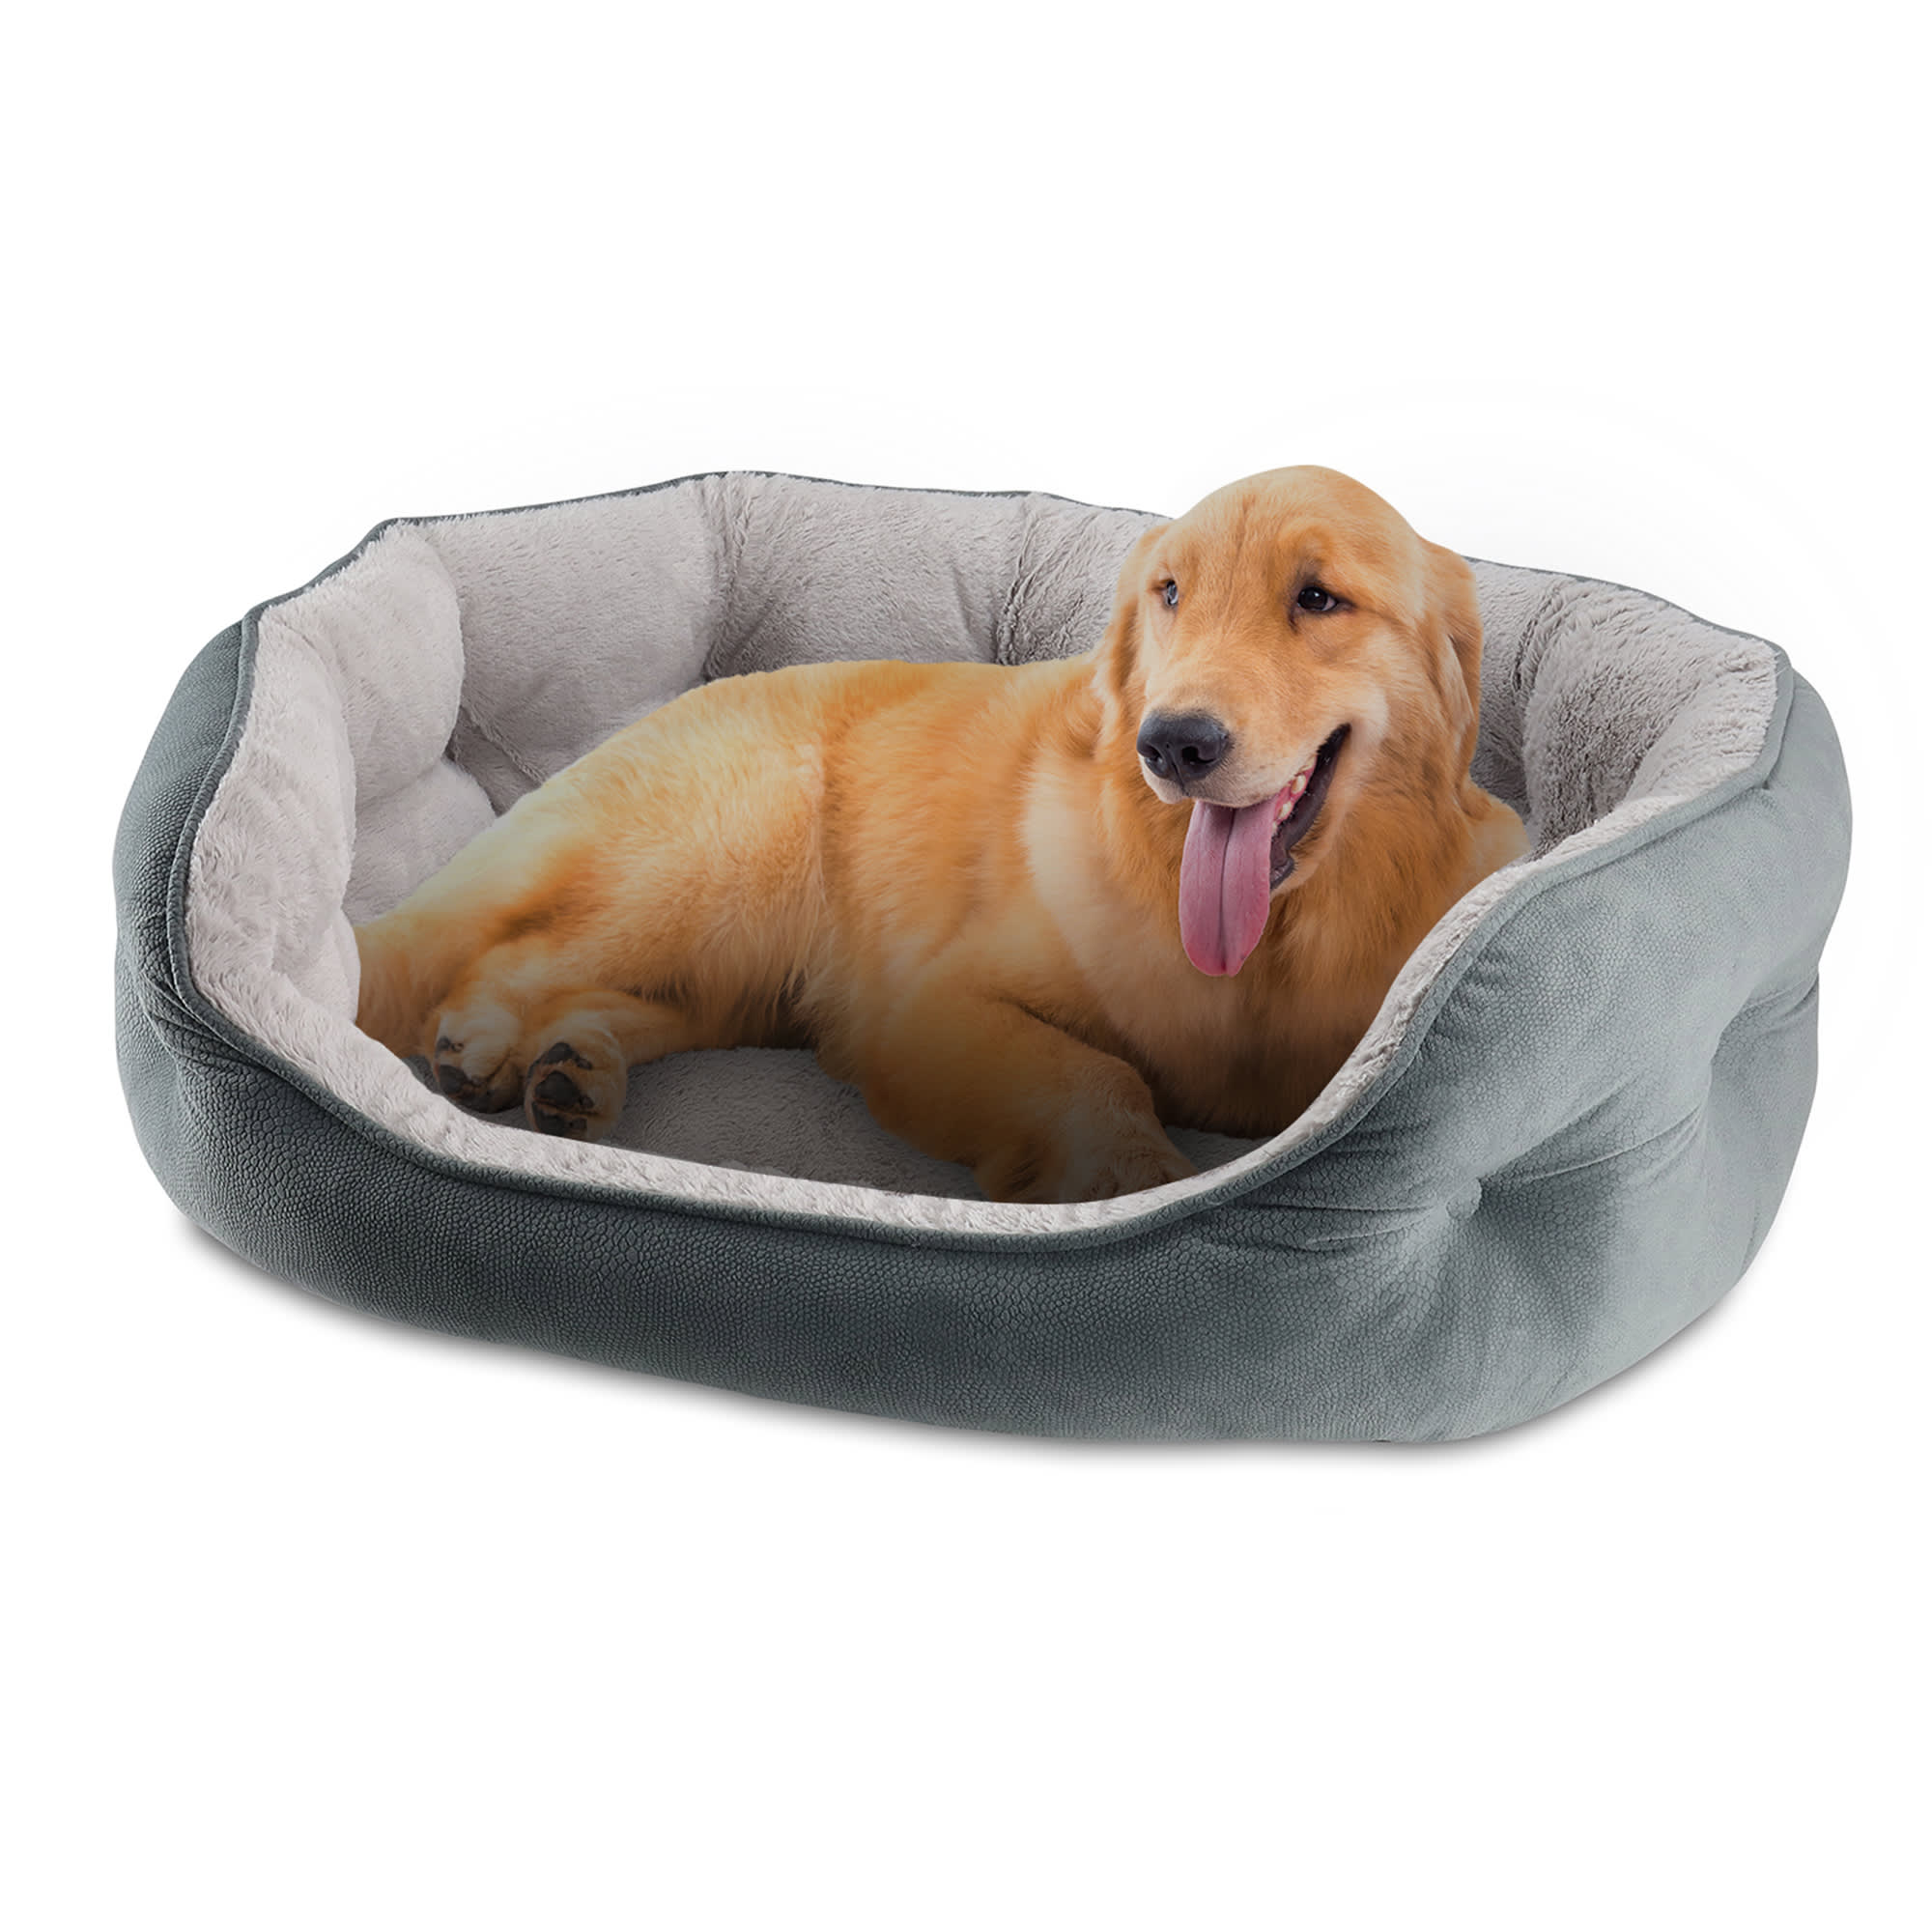 Photos - Dog Bed / Basket Canine Creations Gray Oval Cuddler Dog Bed, 33" L X 27" W 